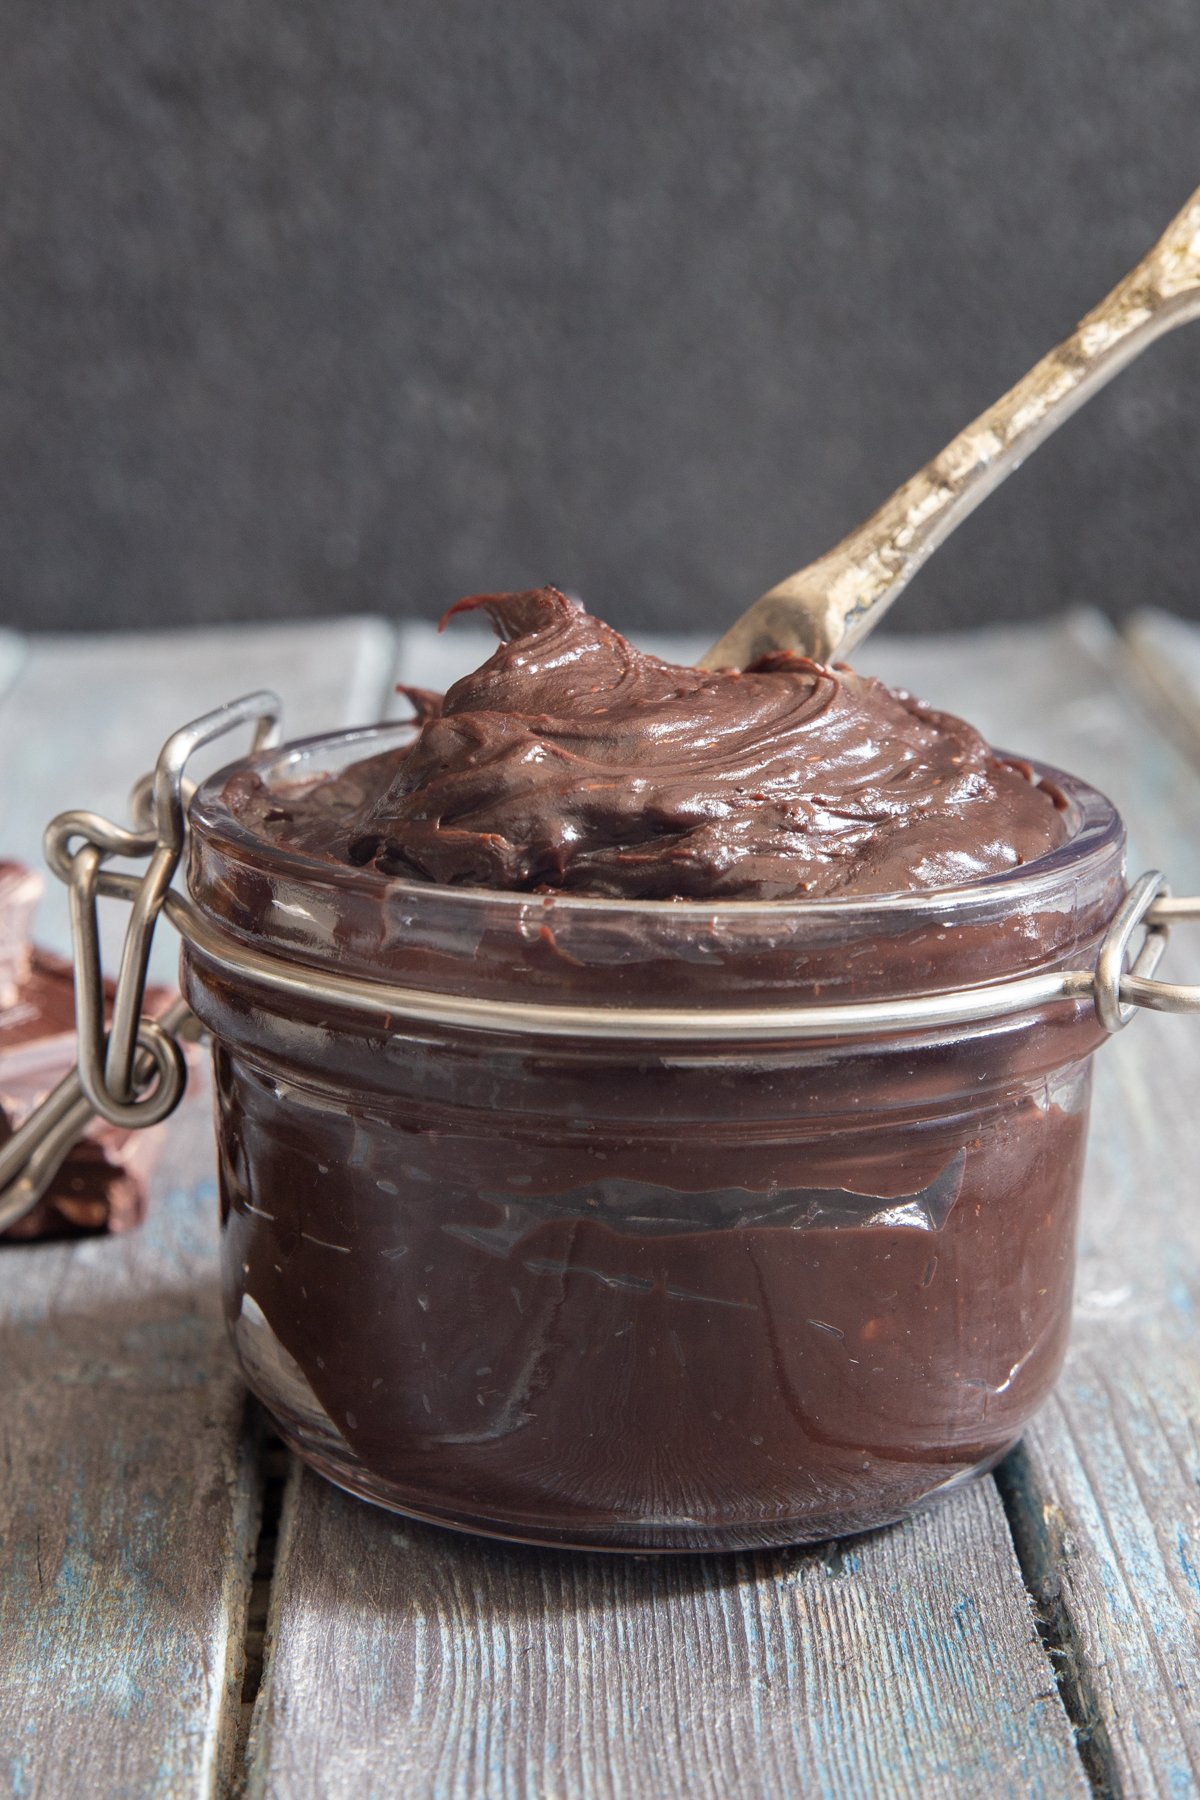 Chocolate Spread in a jar with a silver knife.